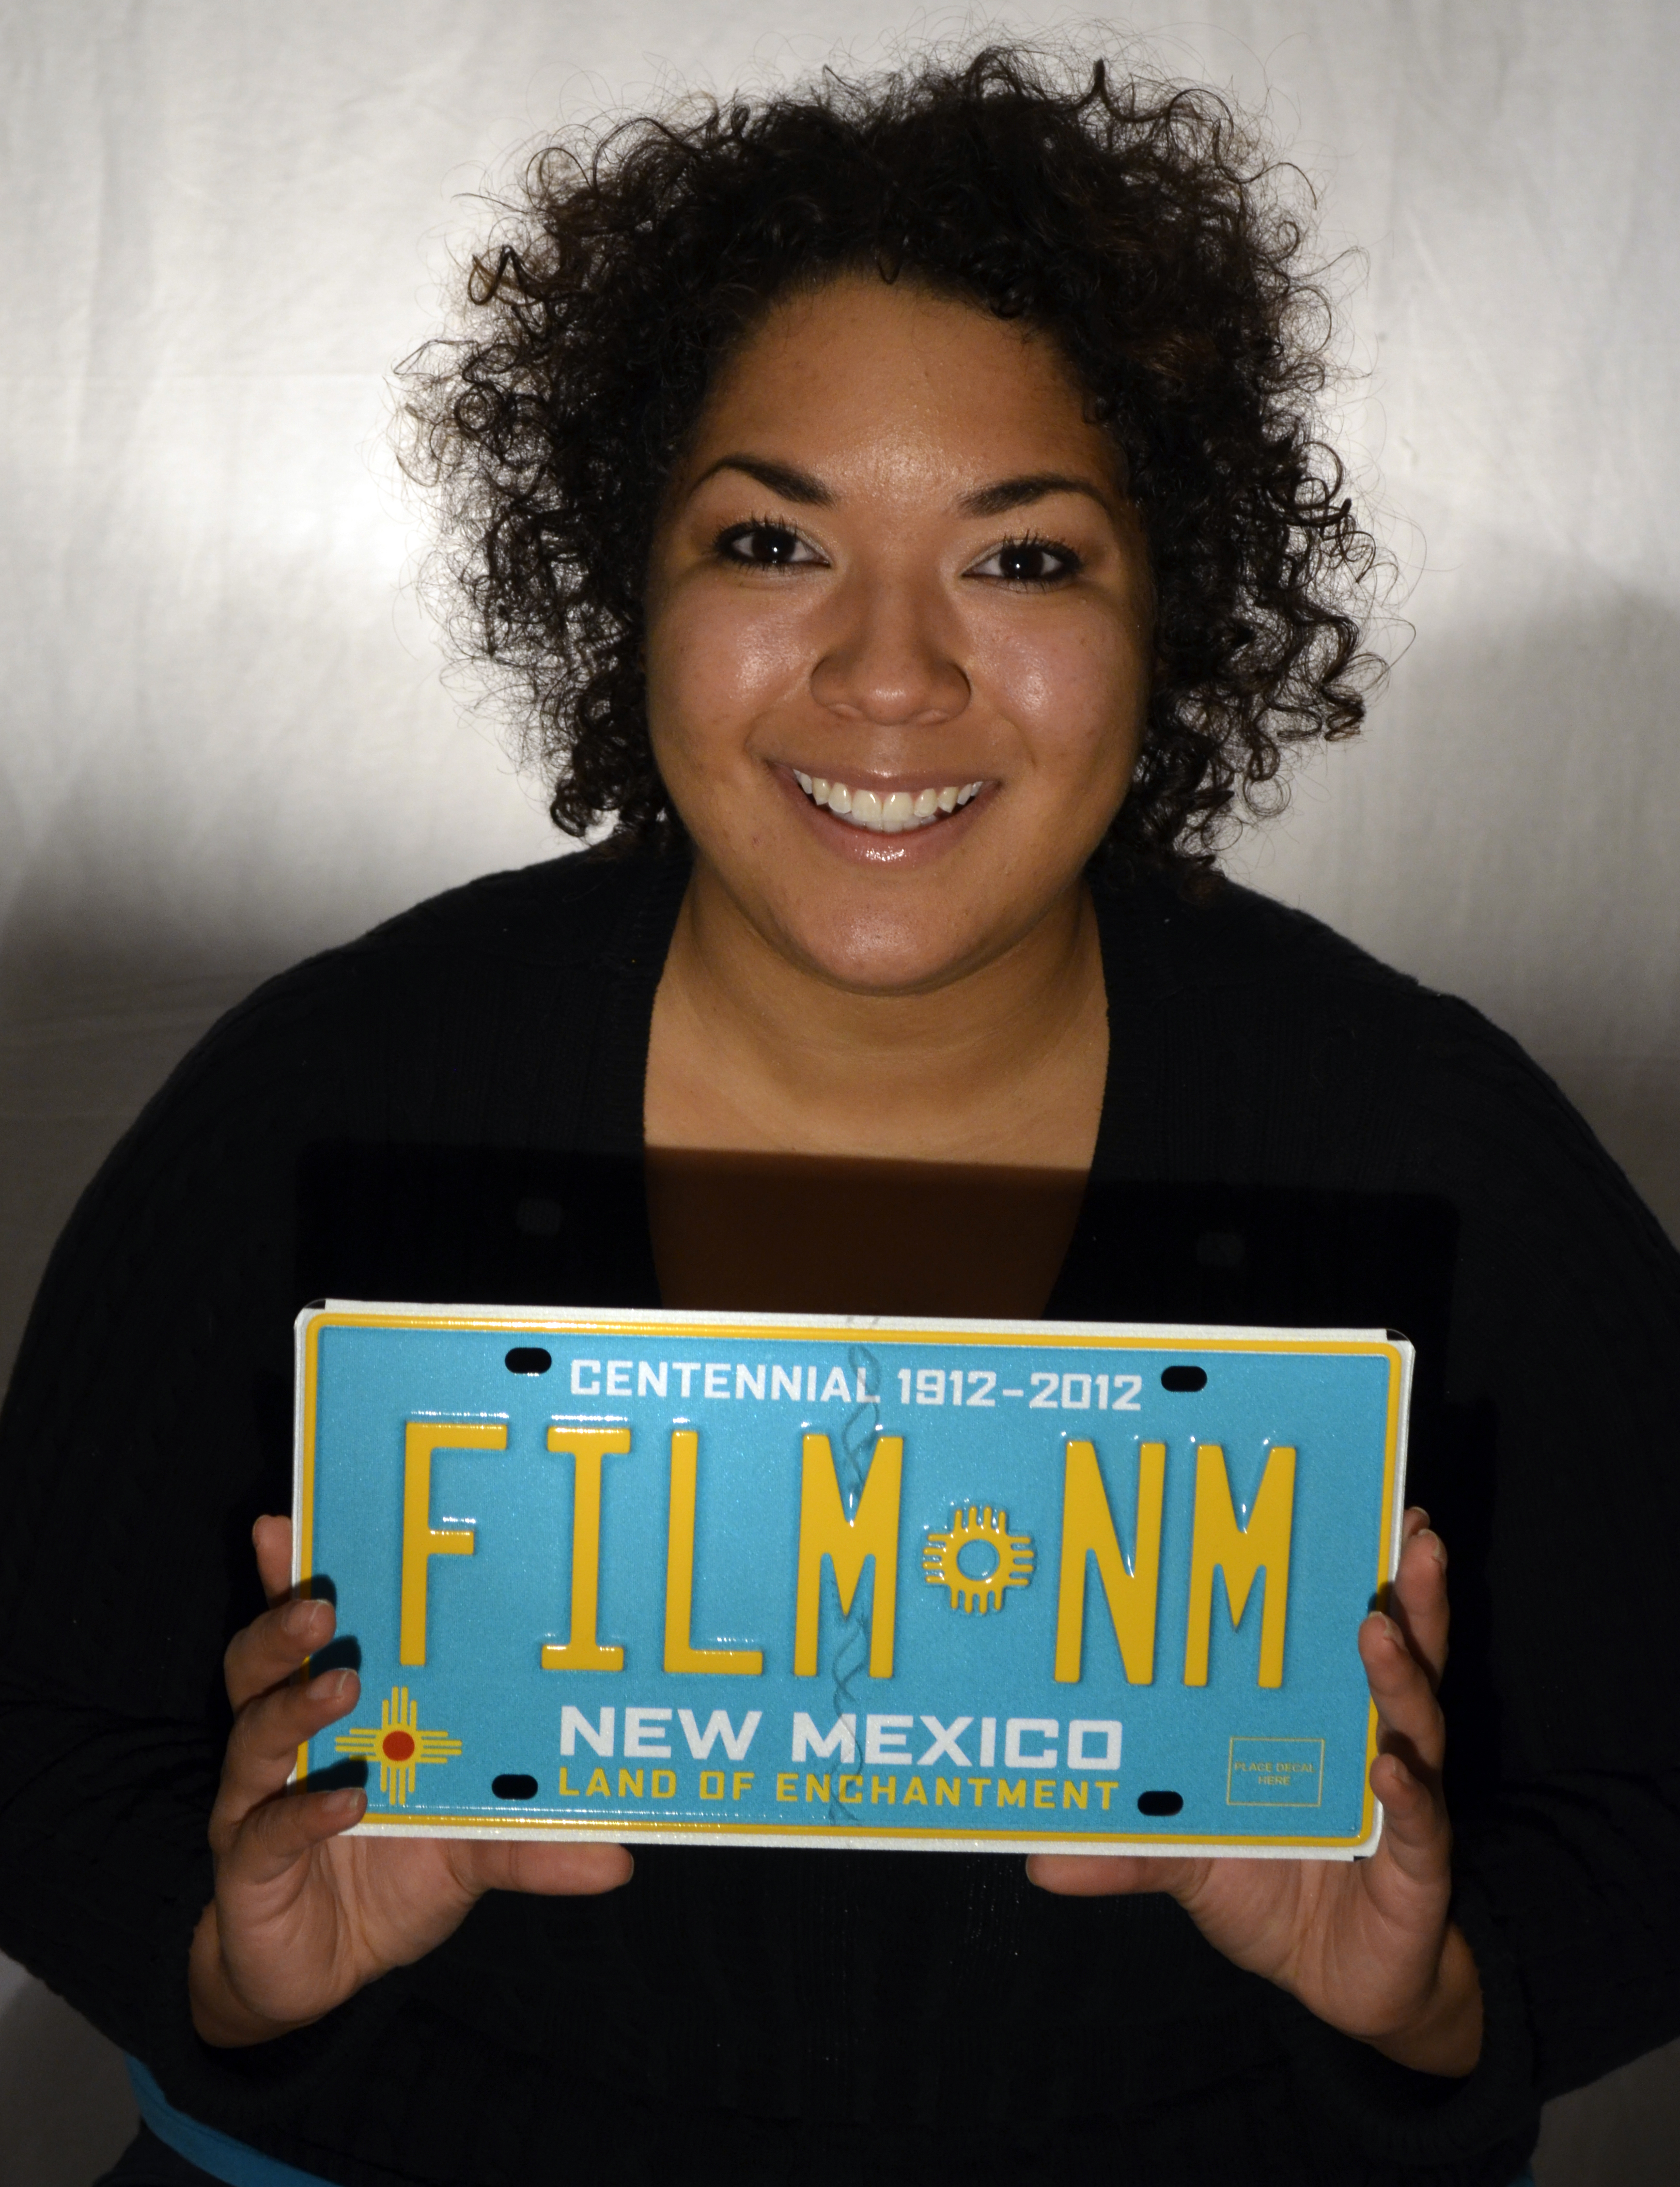 Actress Marika Day with NM Film License Plate